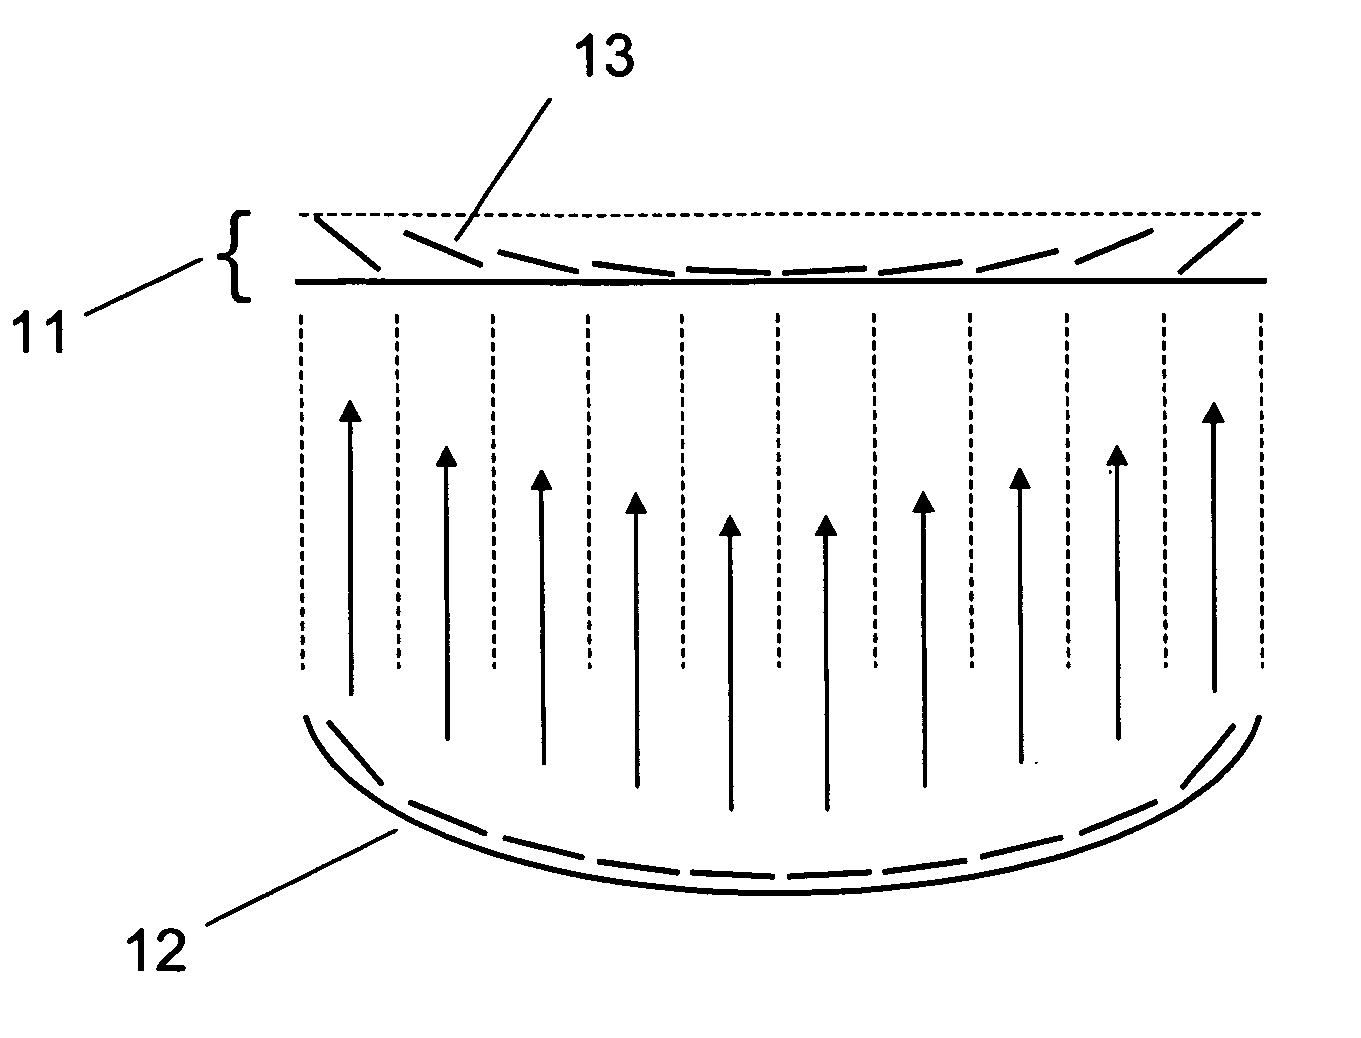 Variable focal length lens comprising micromirrors with two degrees of freedom rotation and one degree of freedom translation